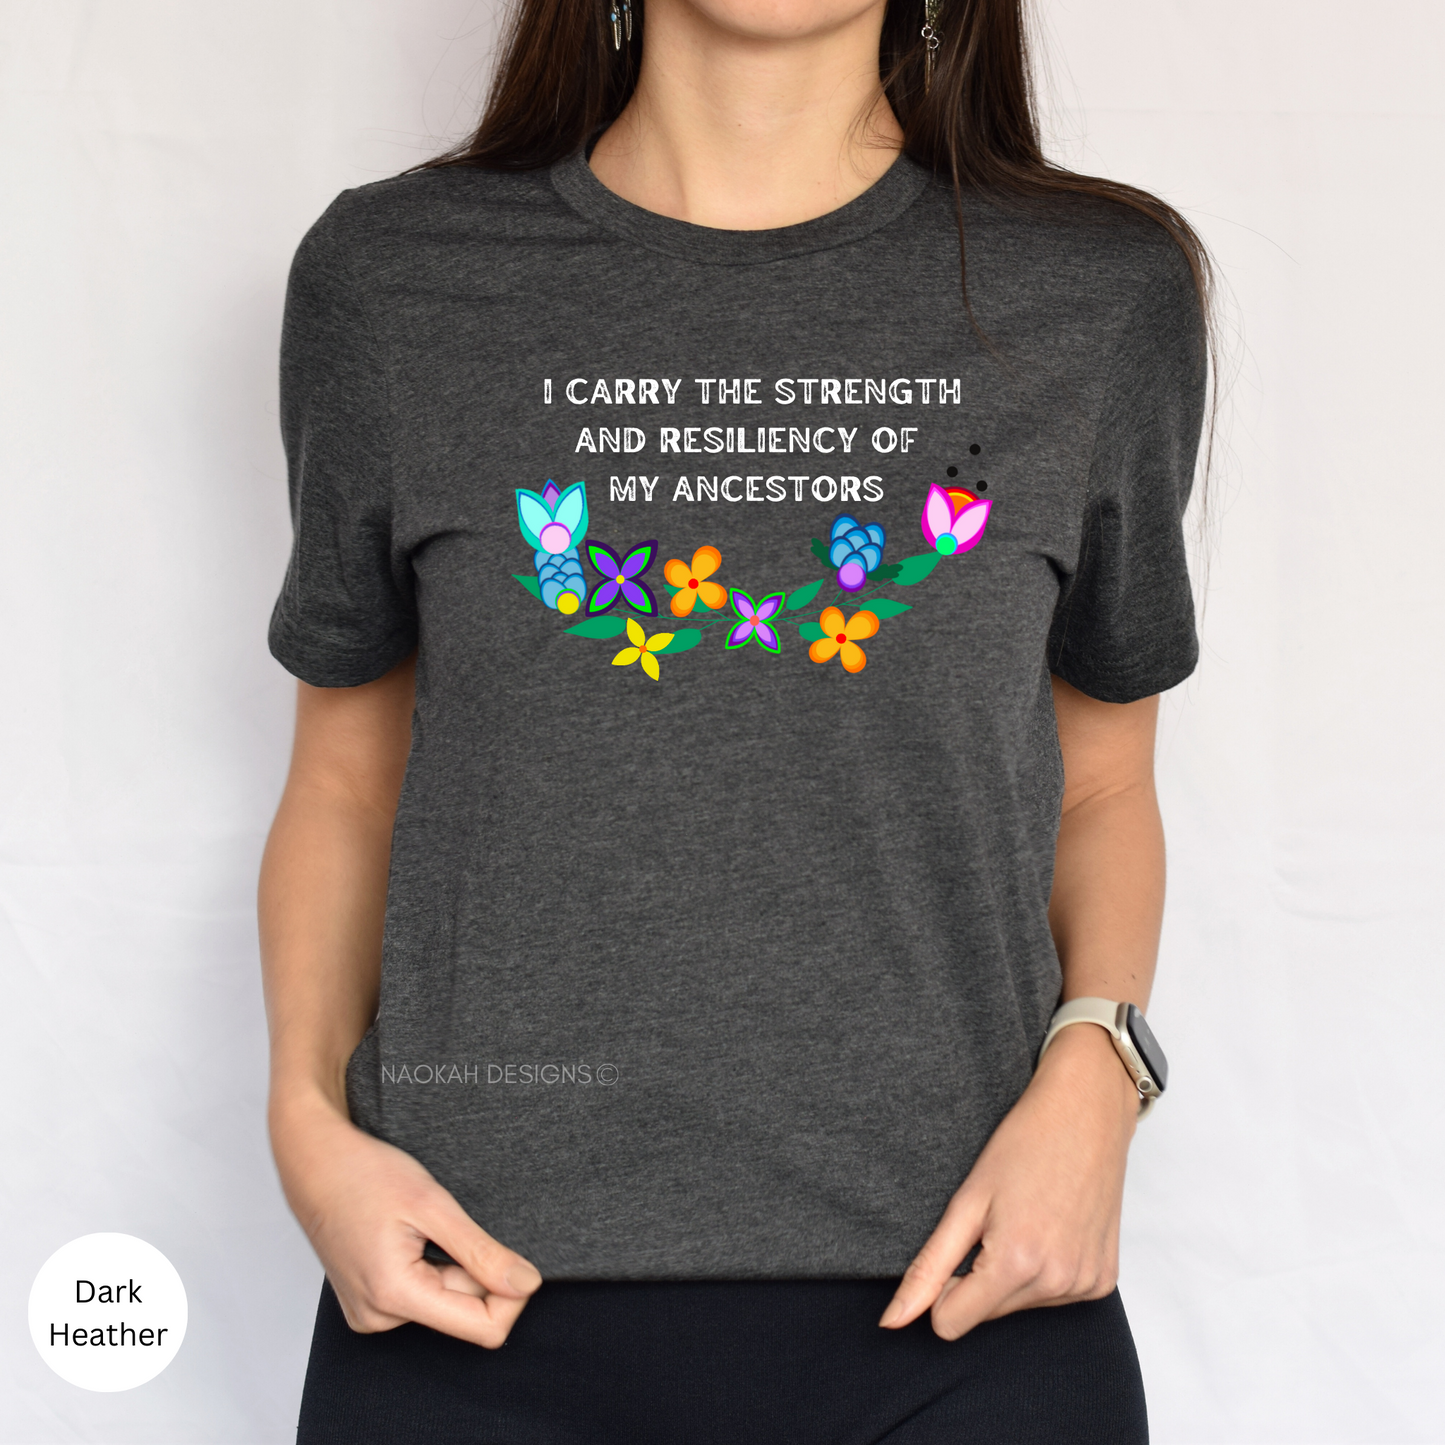 i carry the strength and resiliency of my ancestors shirt, indigenous floral shirt, ancestors shirt, making ancestors proud shirt